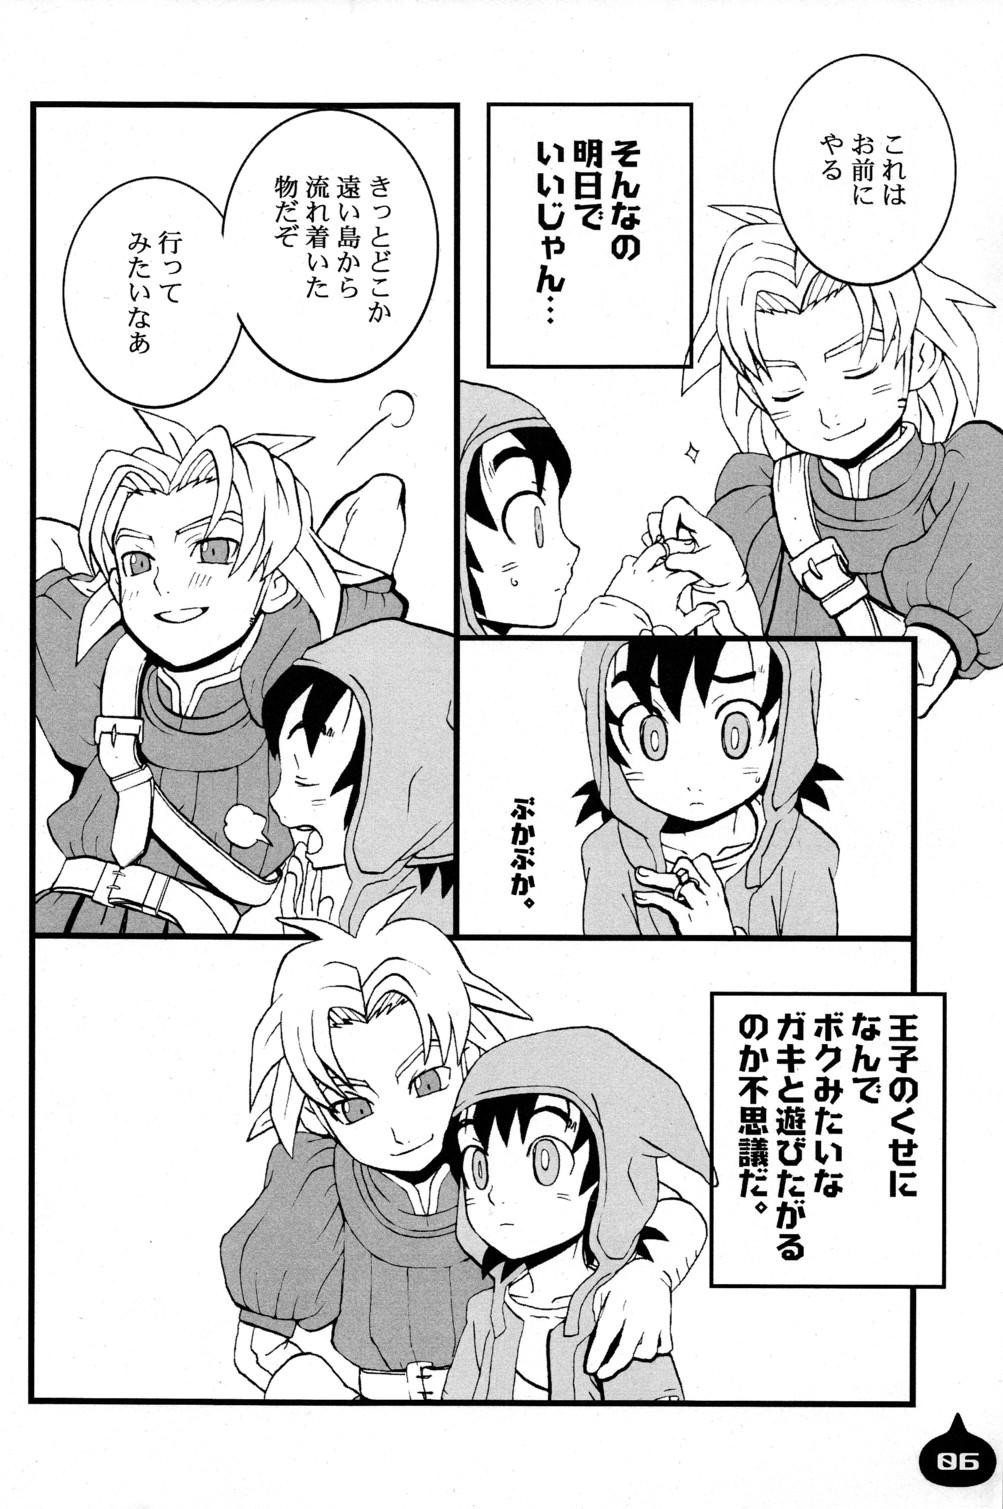 Anime LITTLE L - Dragon quest vii Lord of lords ryu knight | haou taikei ryuu knight Gay Deepthroat - Page 6